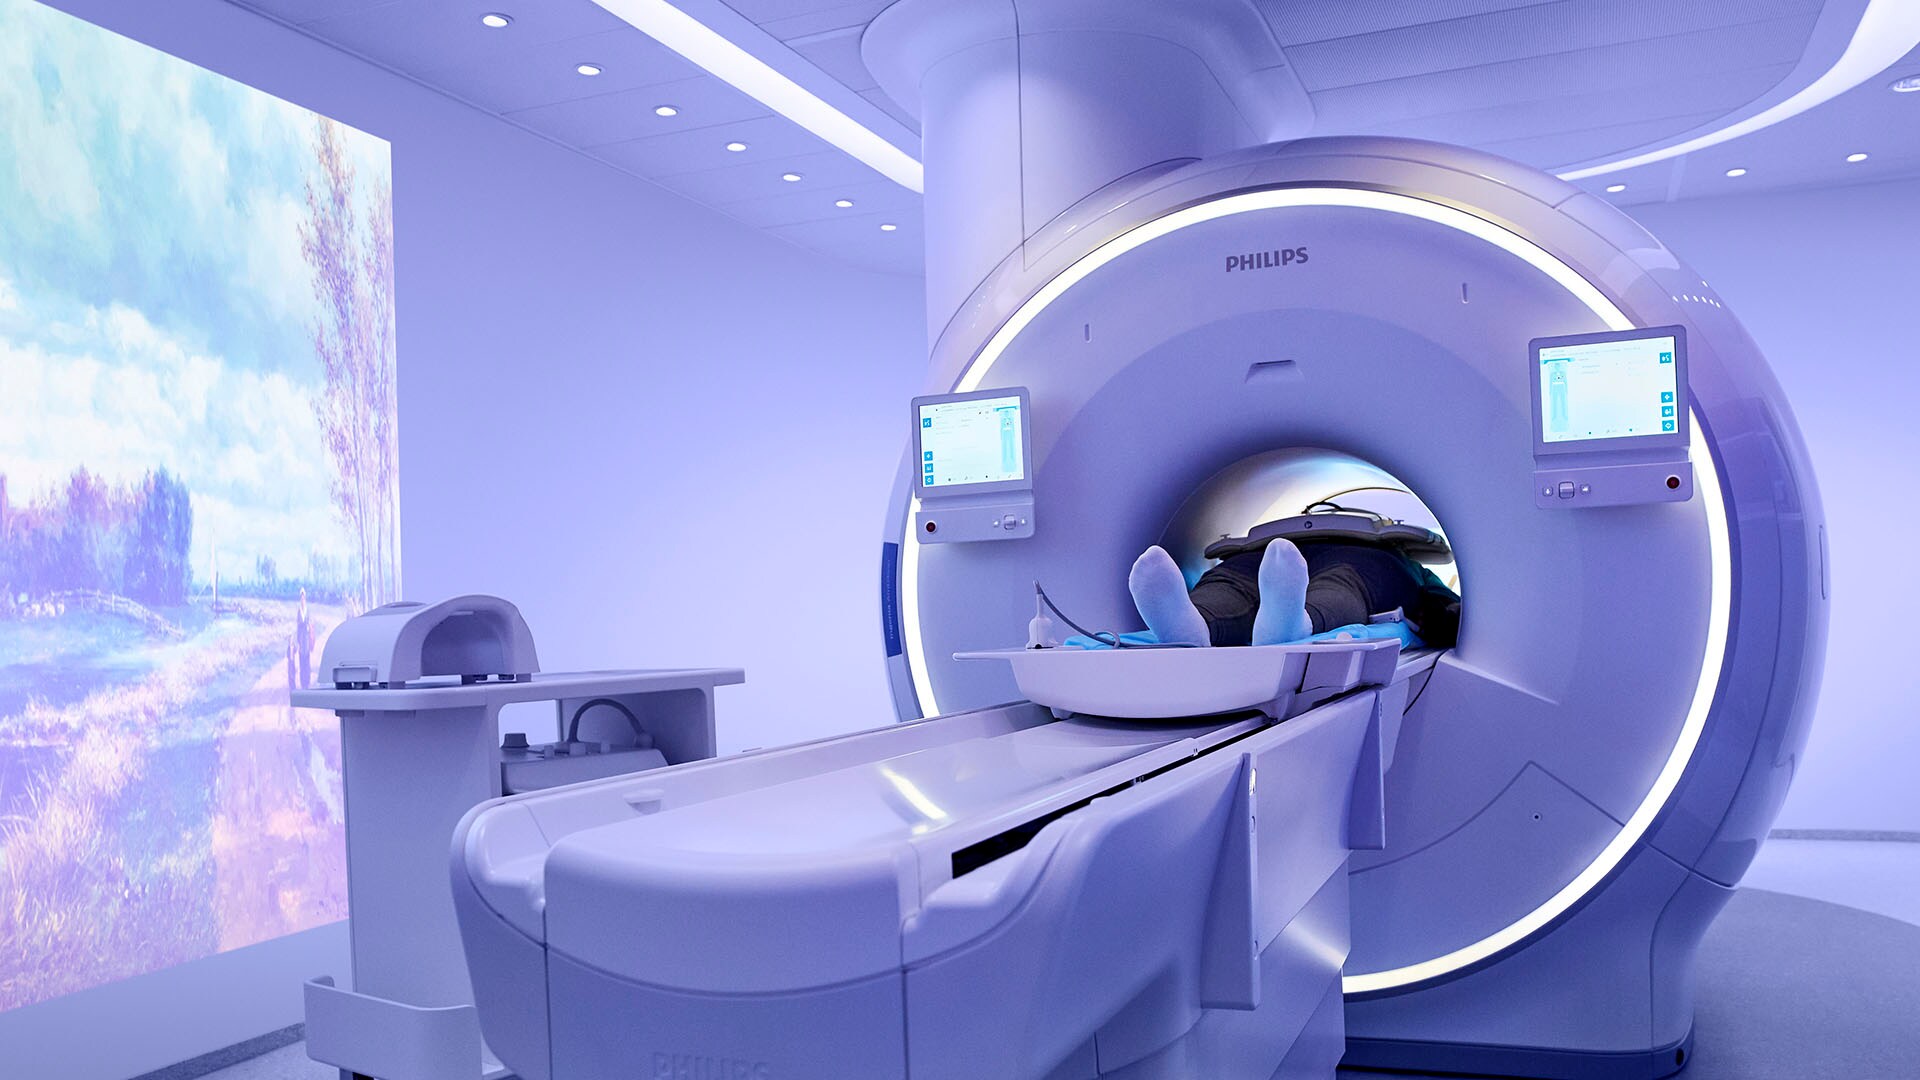 Champalimaud Foundation partners with Philips to reduce its diagnostic imaging carbon footprint by 50% in five years